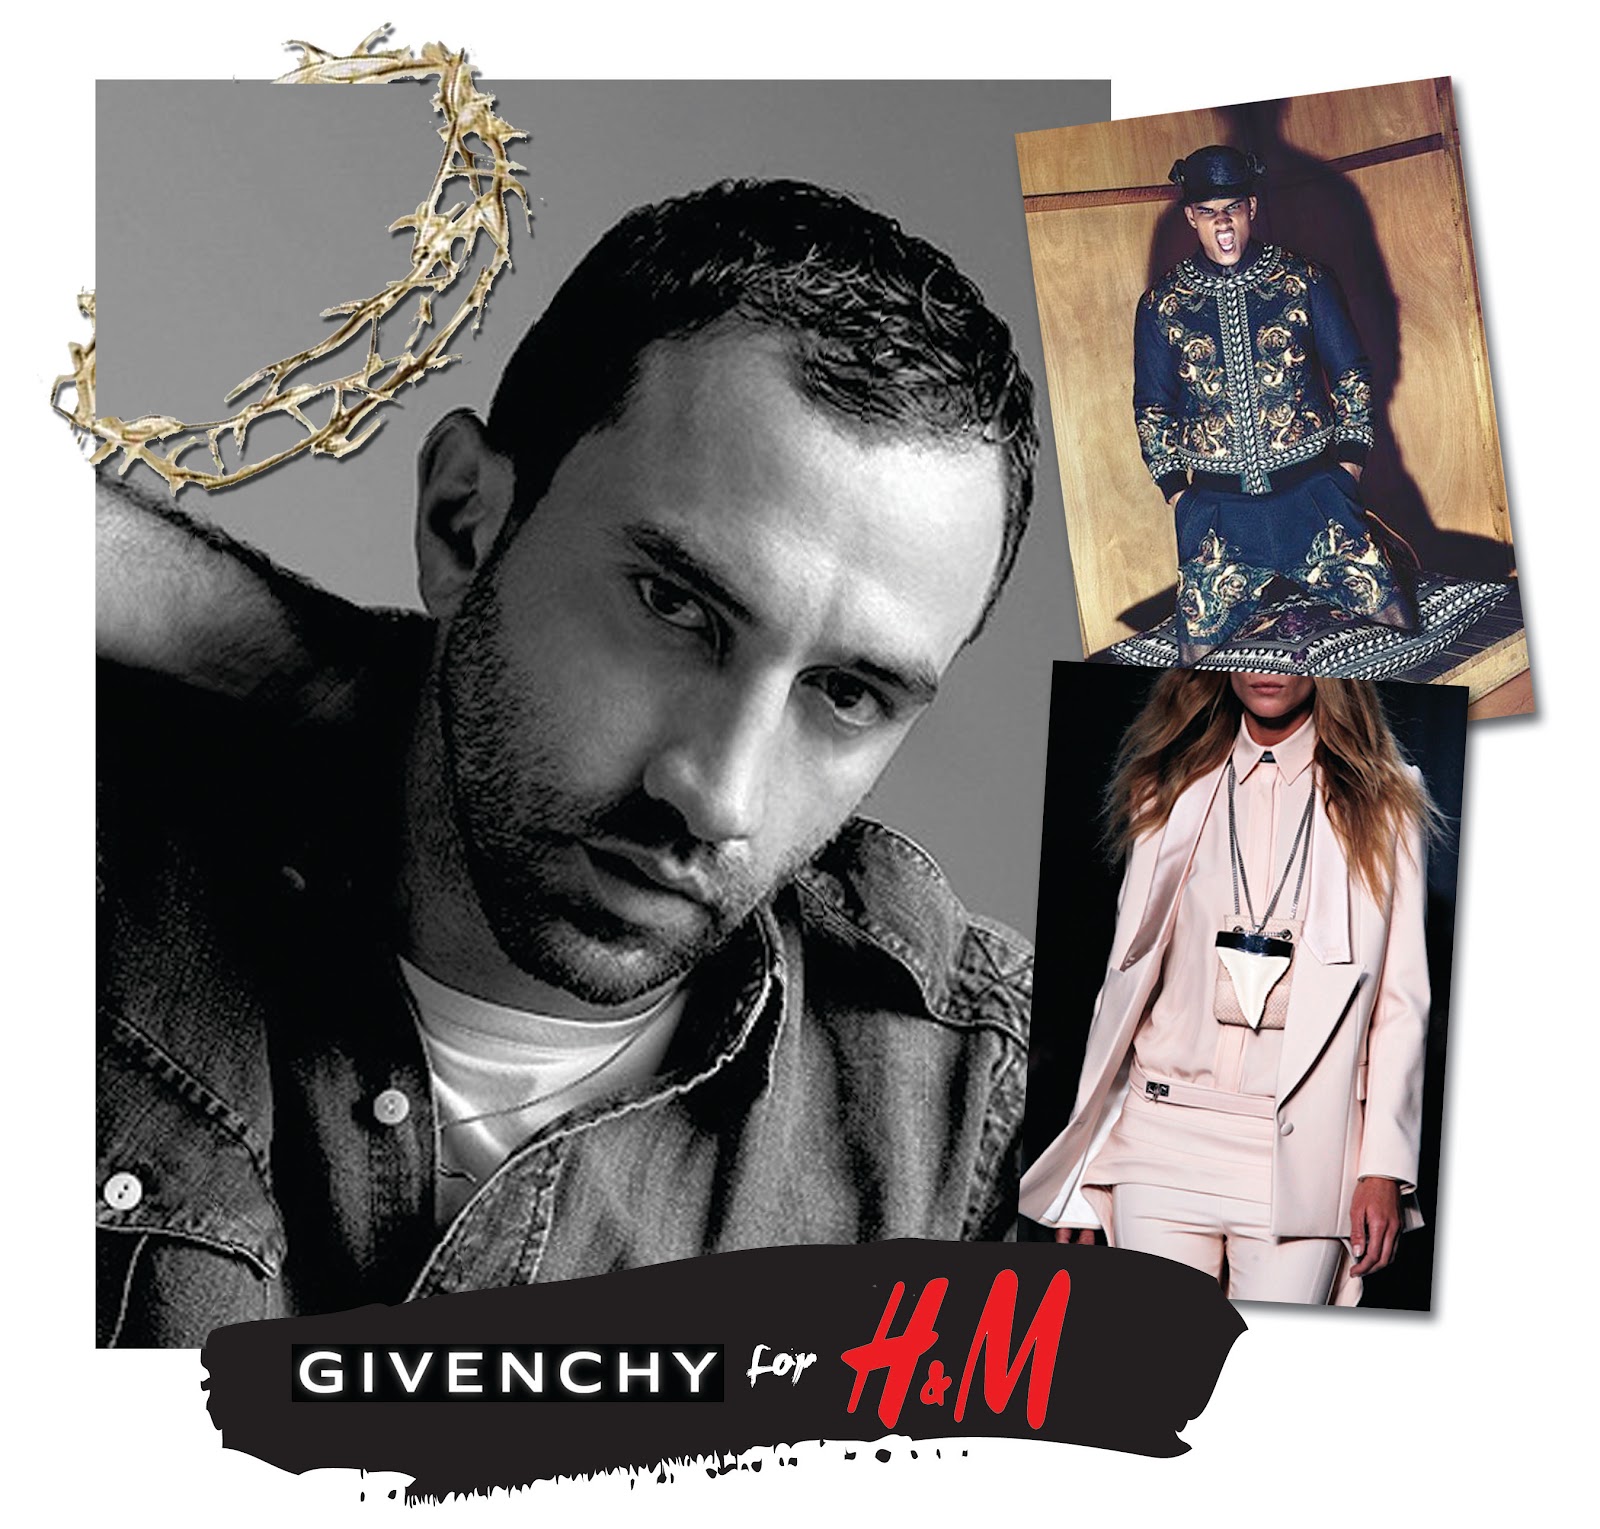 h&m x givenchy